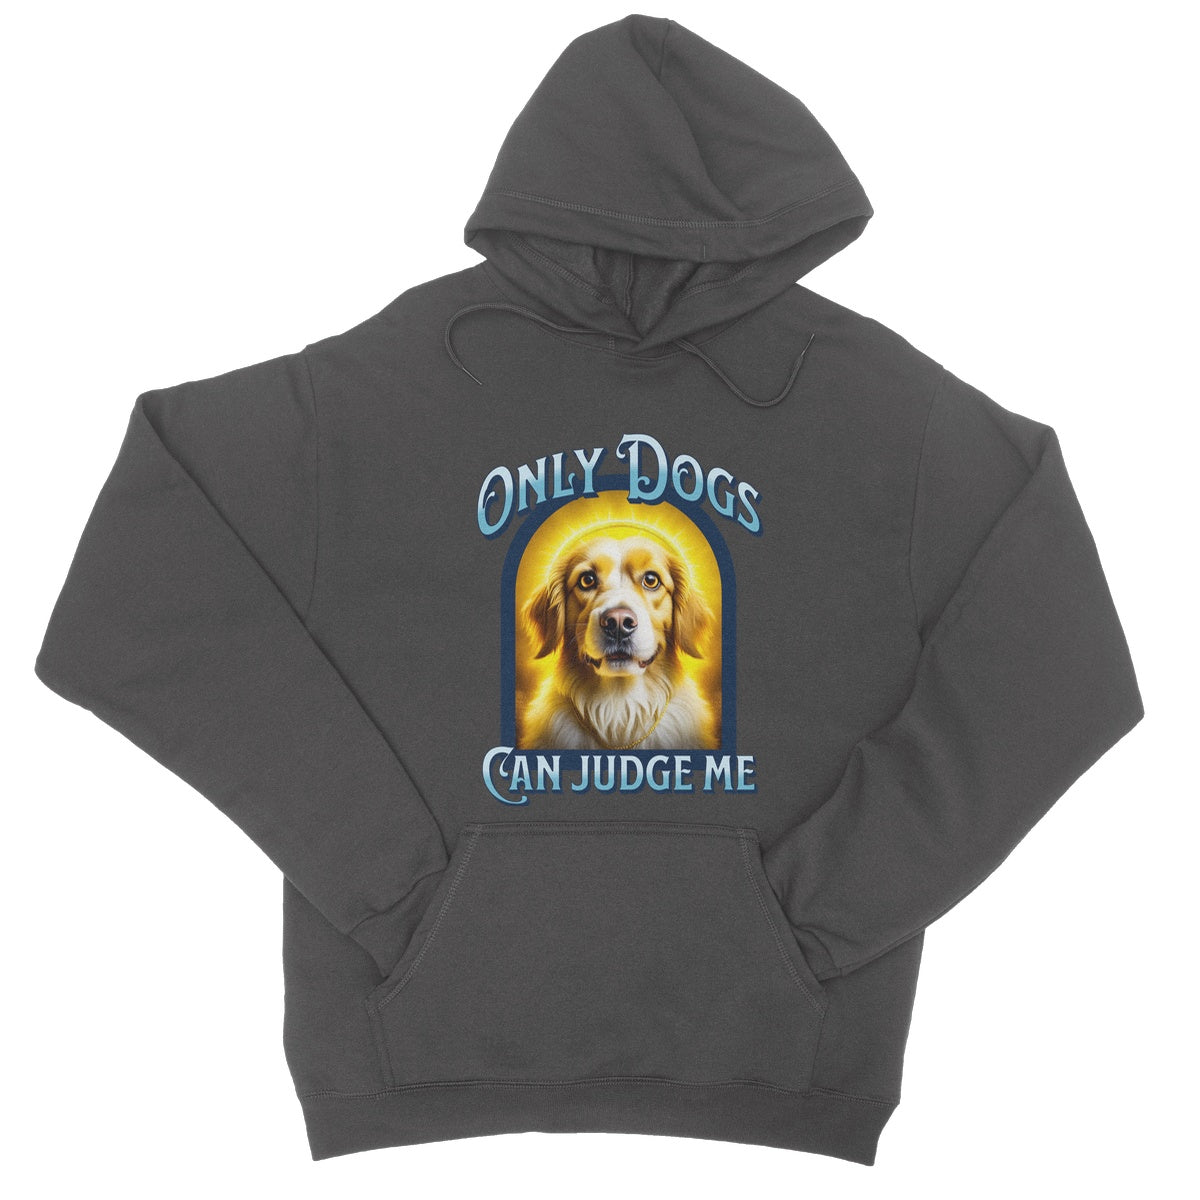 only dogs can judge me hoodie grey